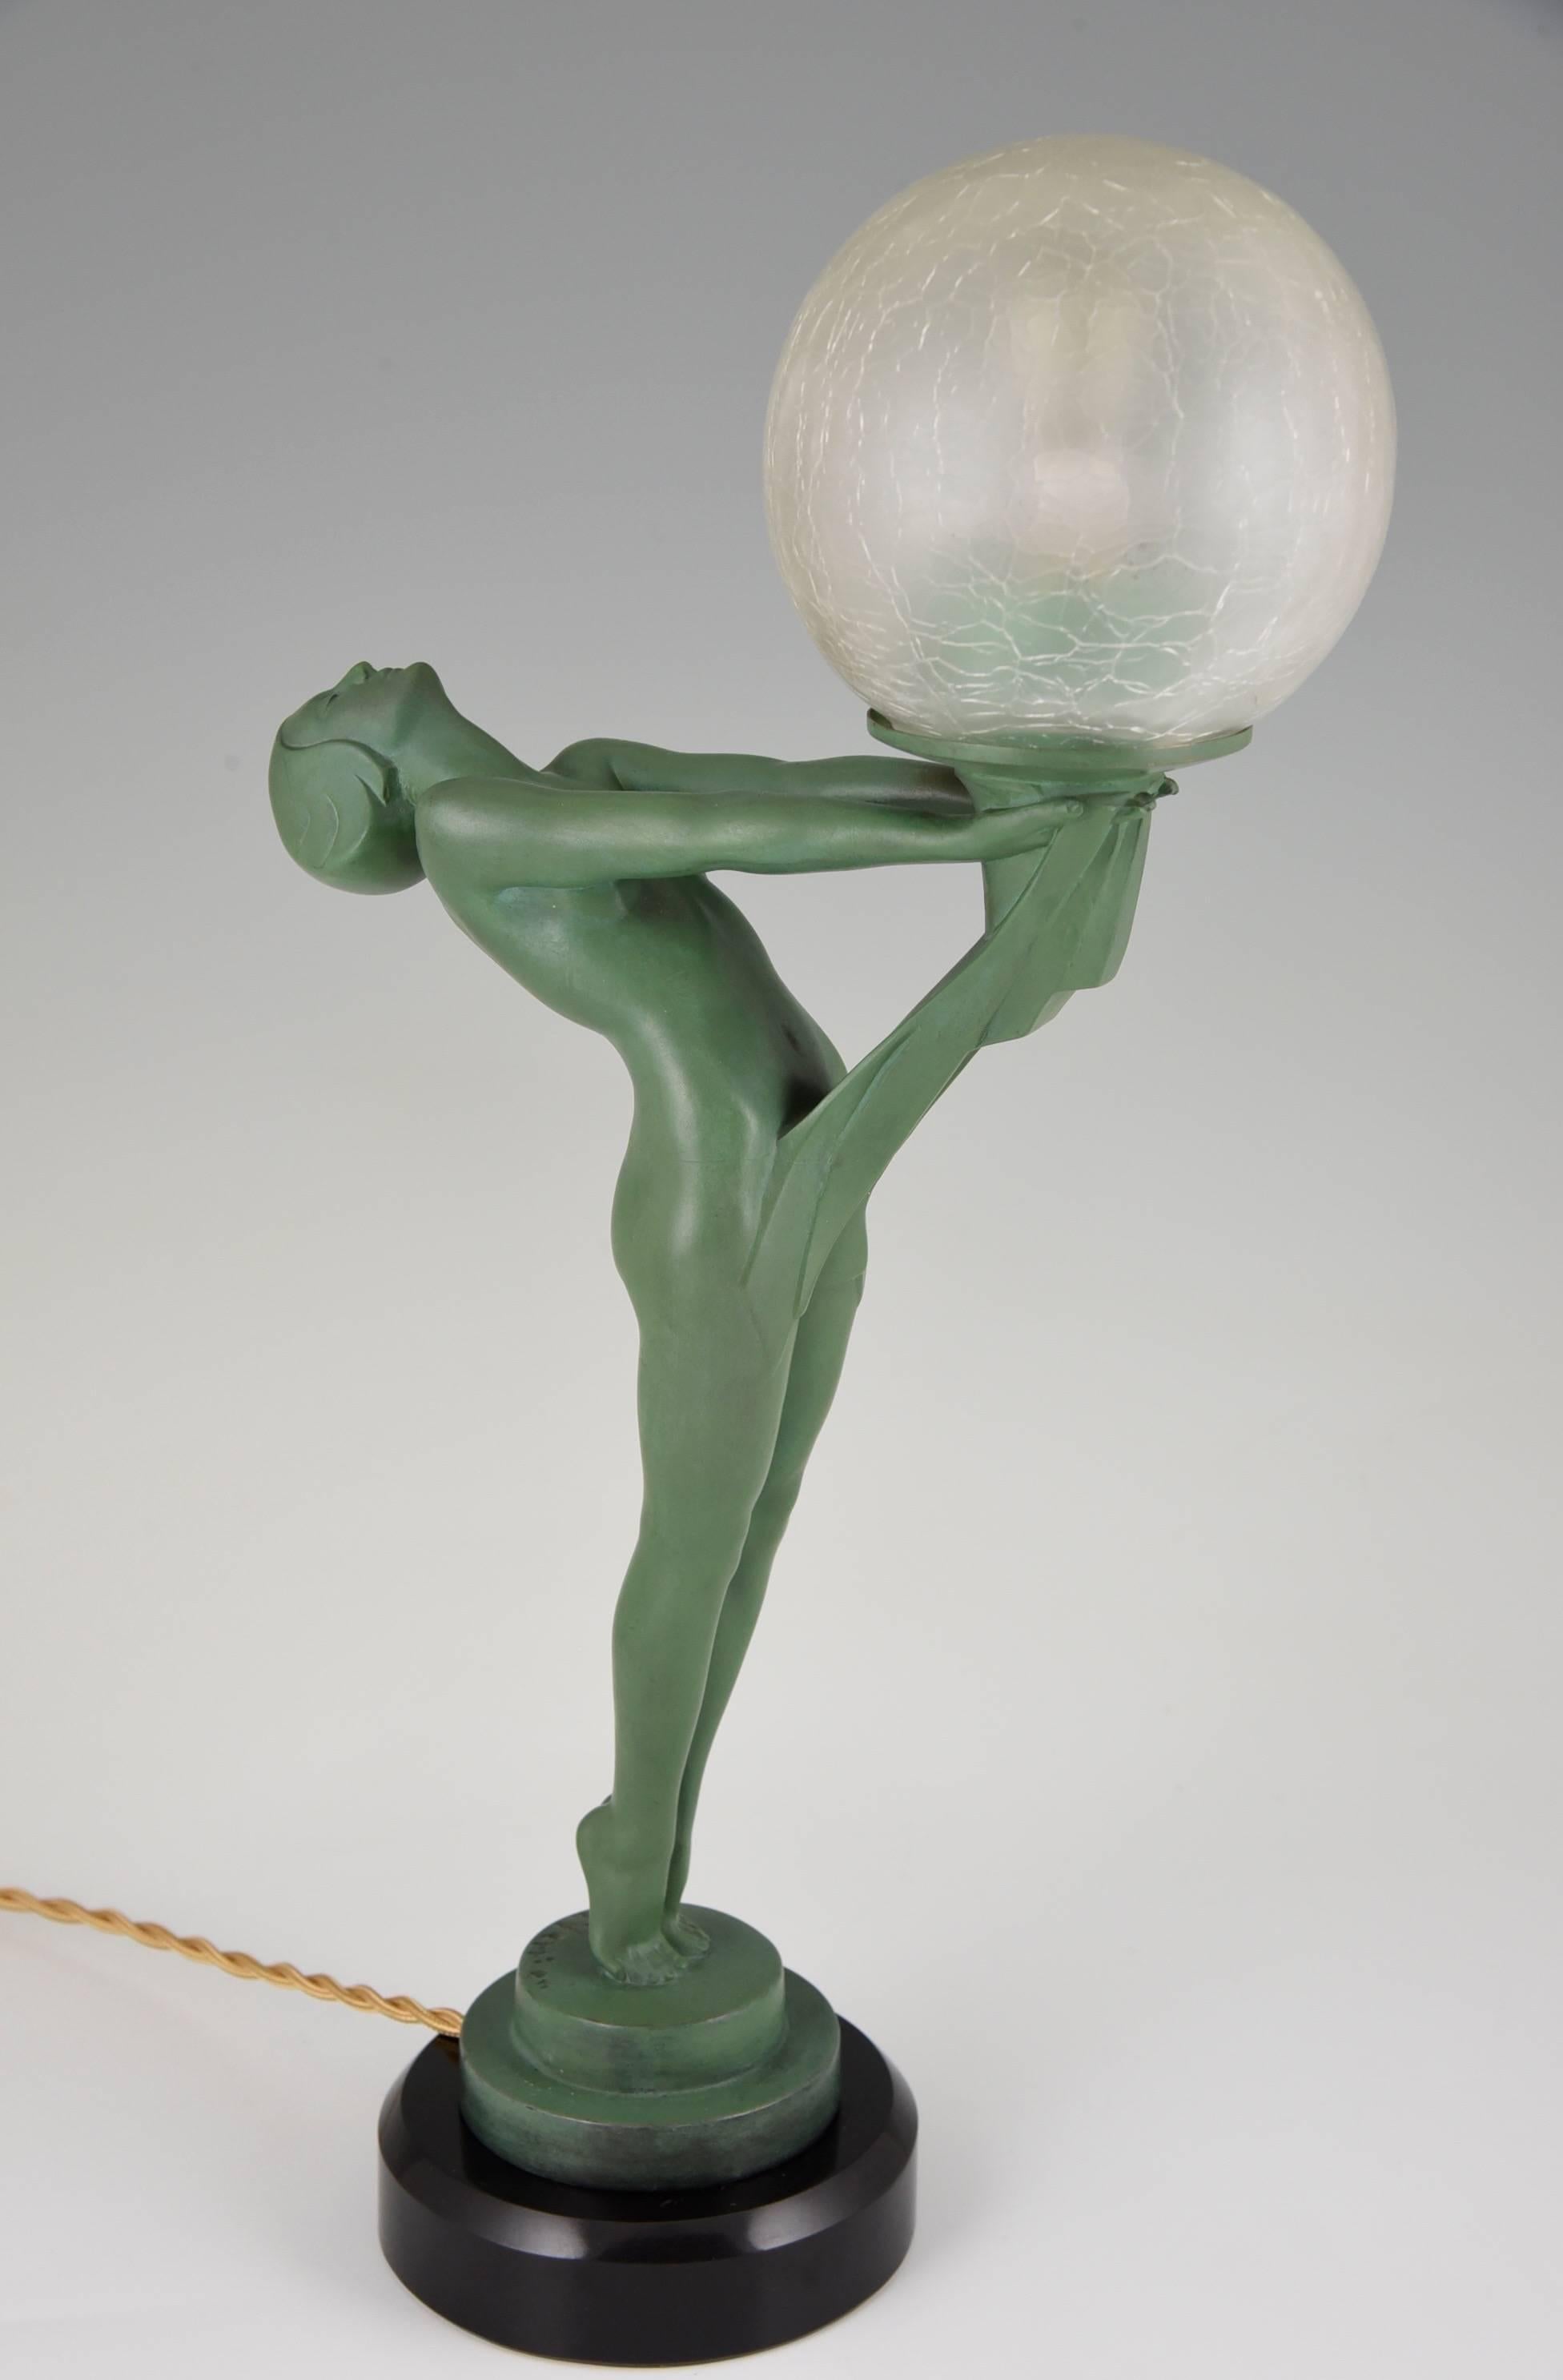 Patinated French Art Deco Lamp Nude Holding a Globe by Max Le Verrier, 1930